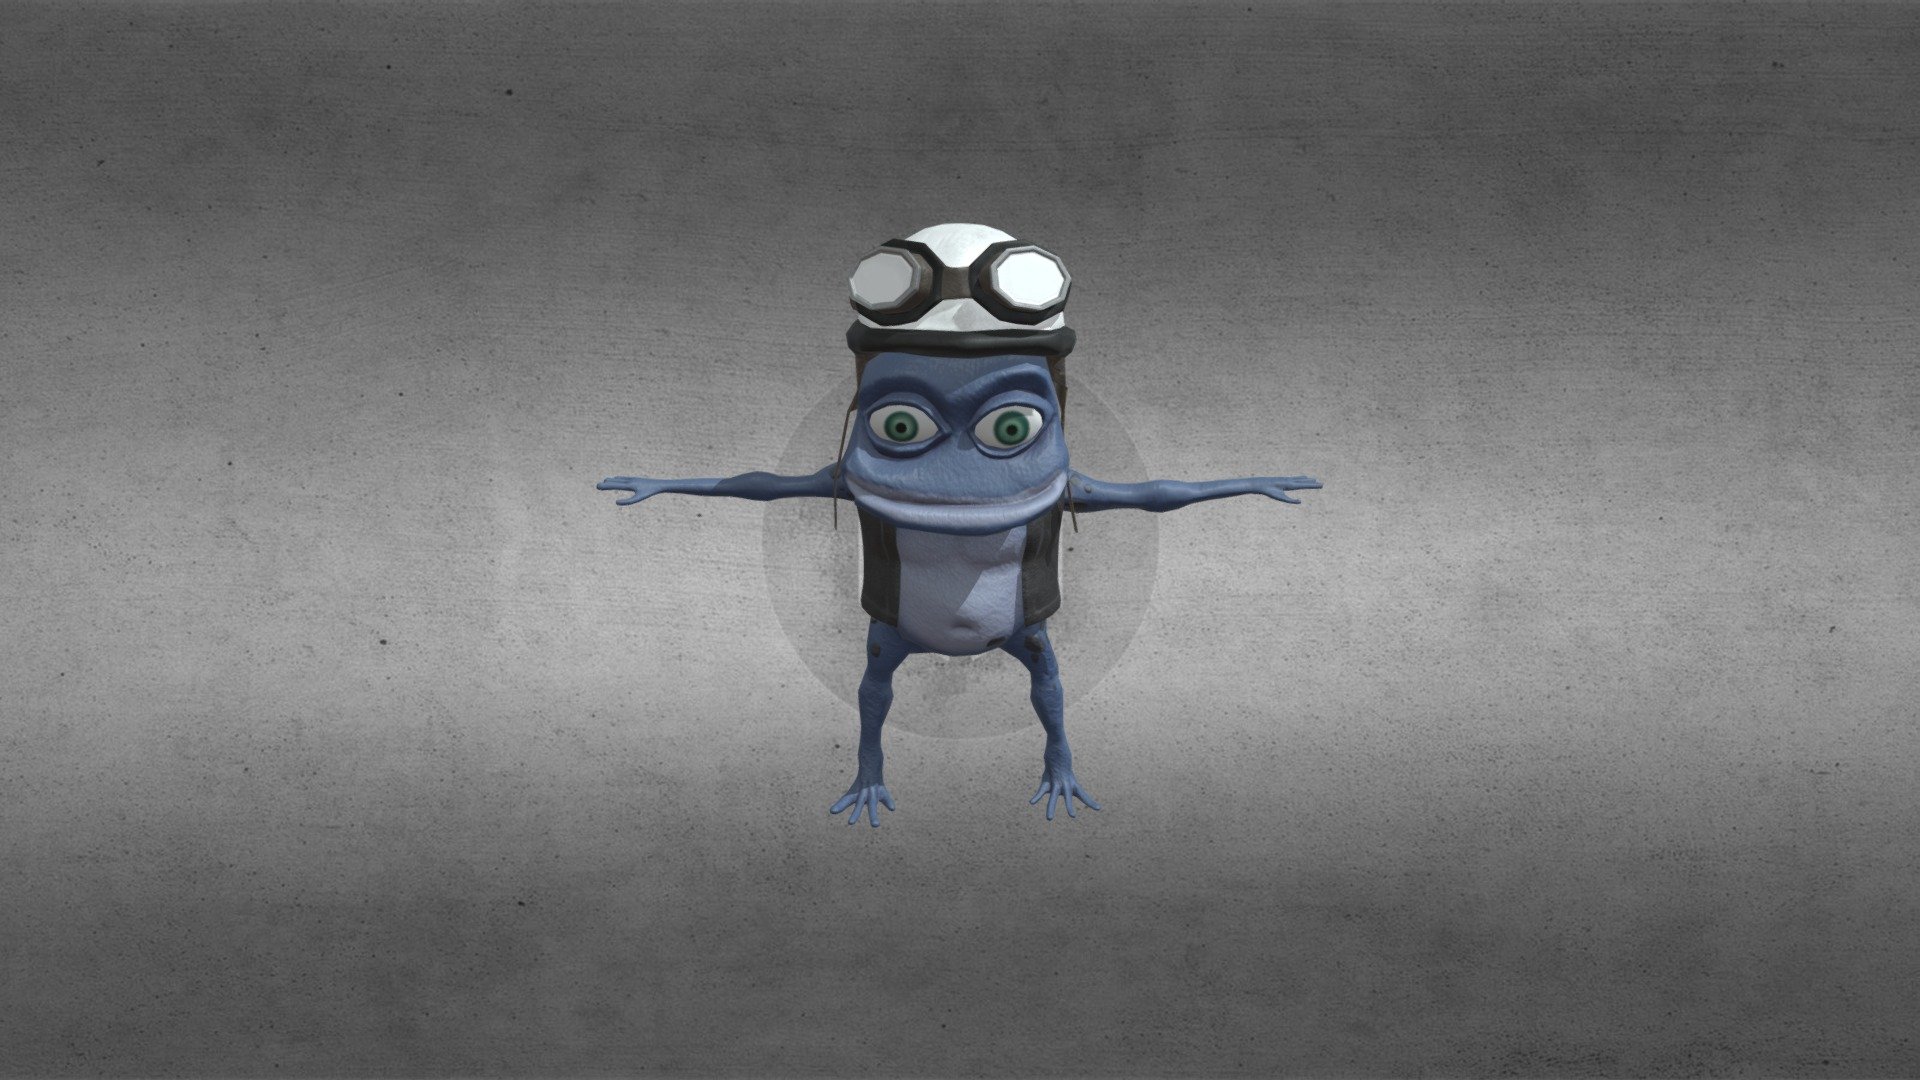 ArtStation - Crazy Frog - The Most Annoying Thing in the World